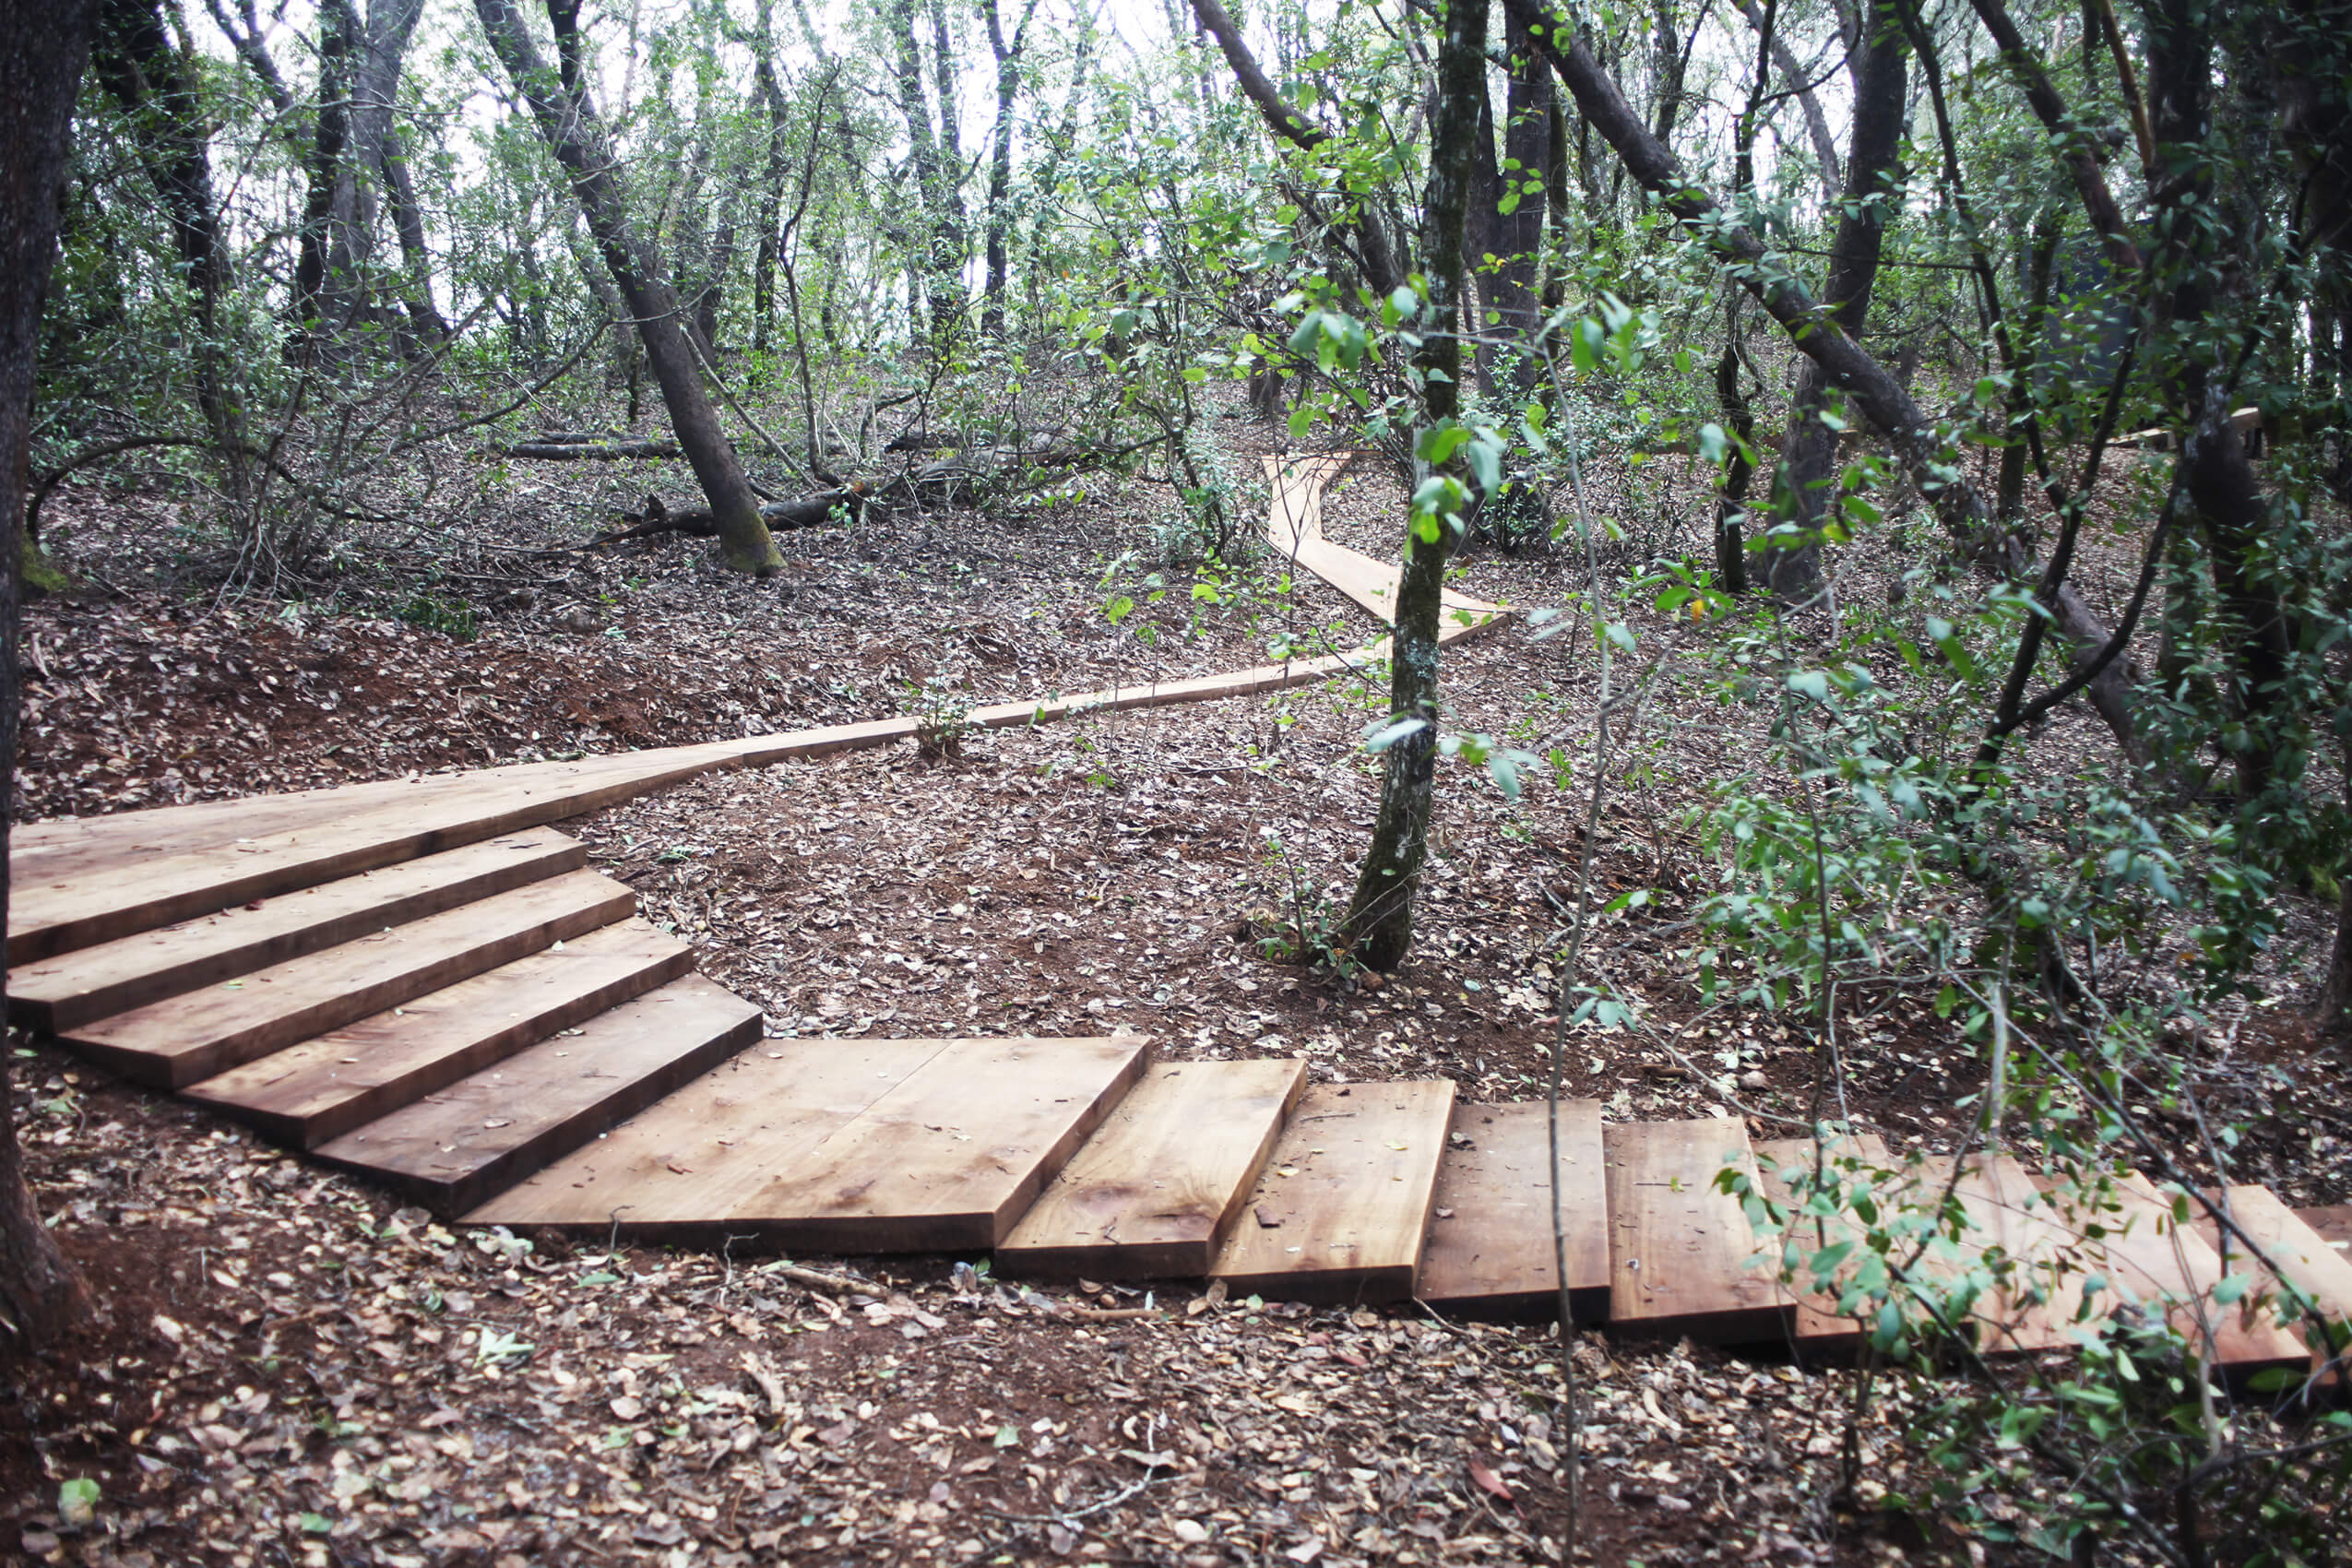 A wooden pathway through the woods